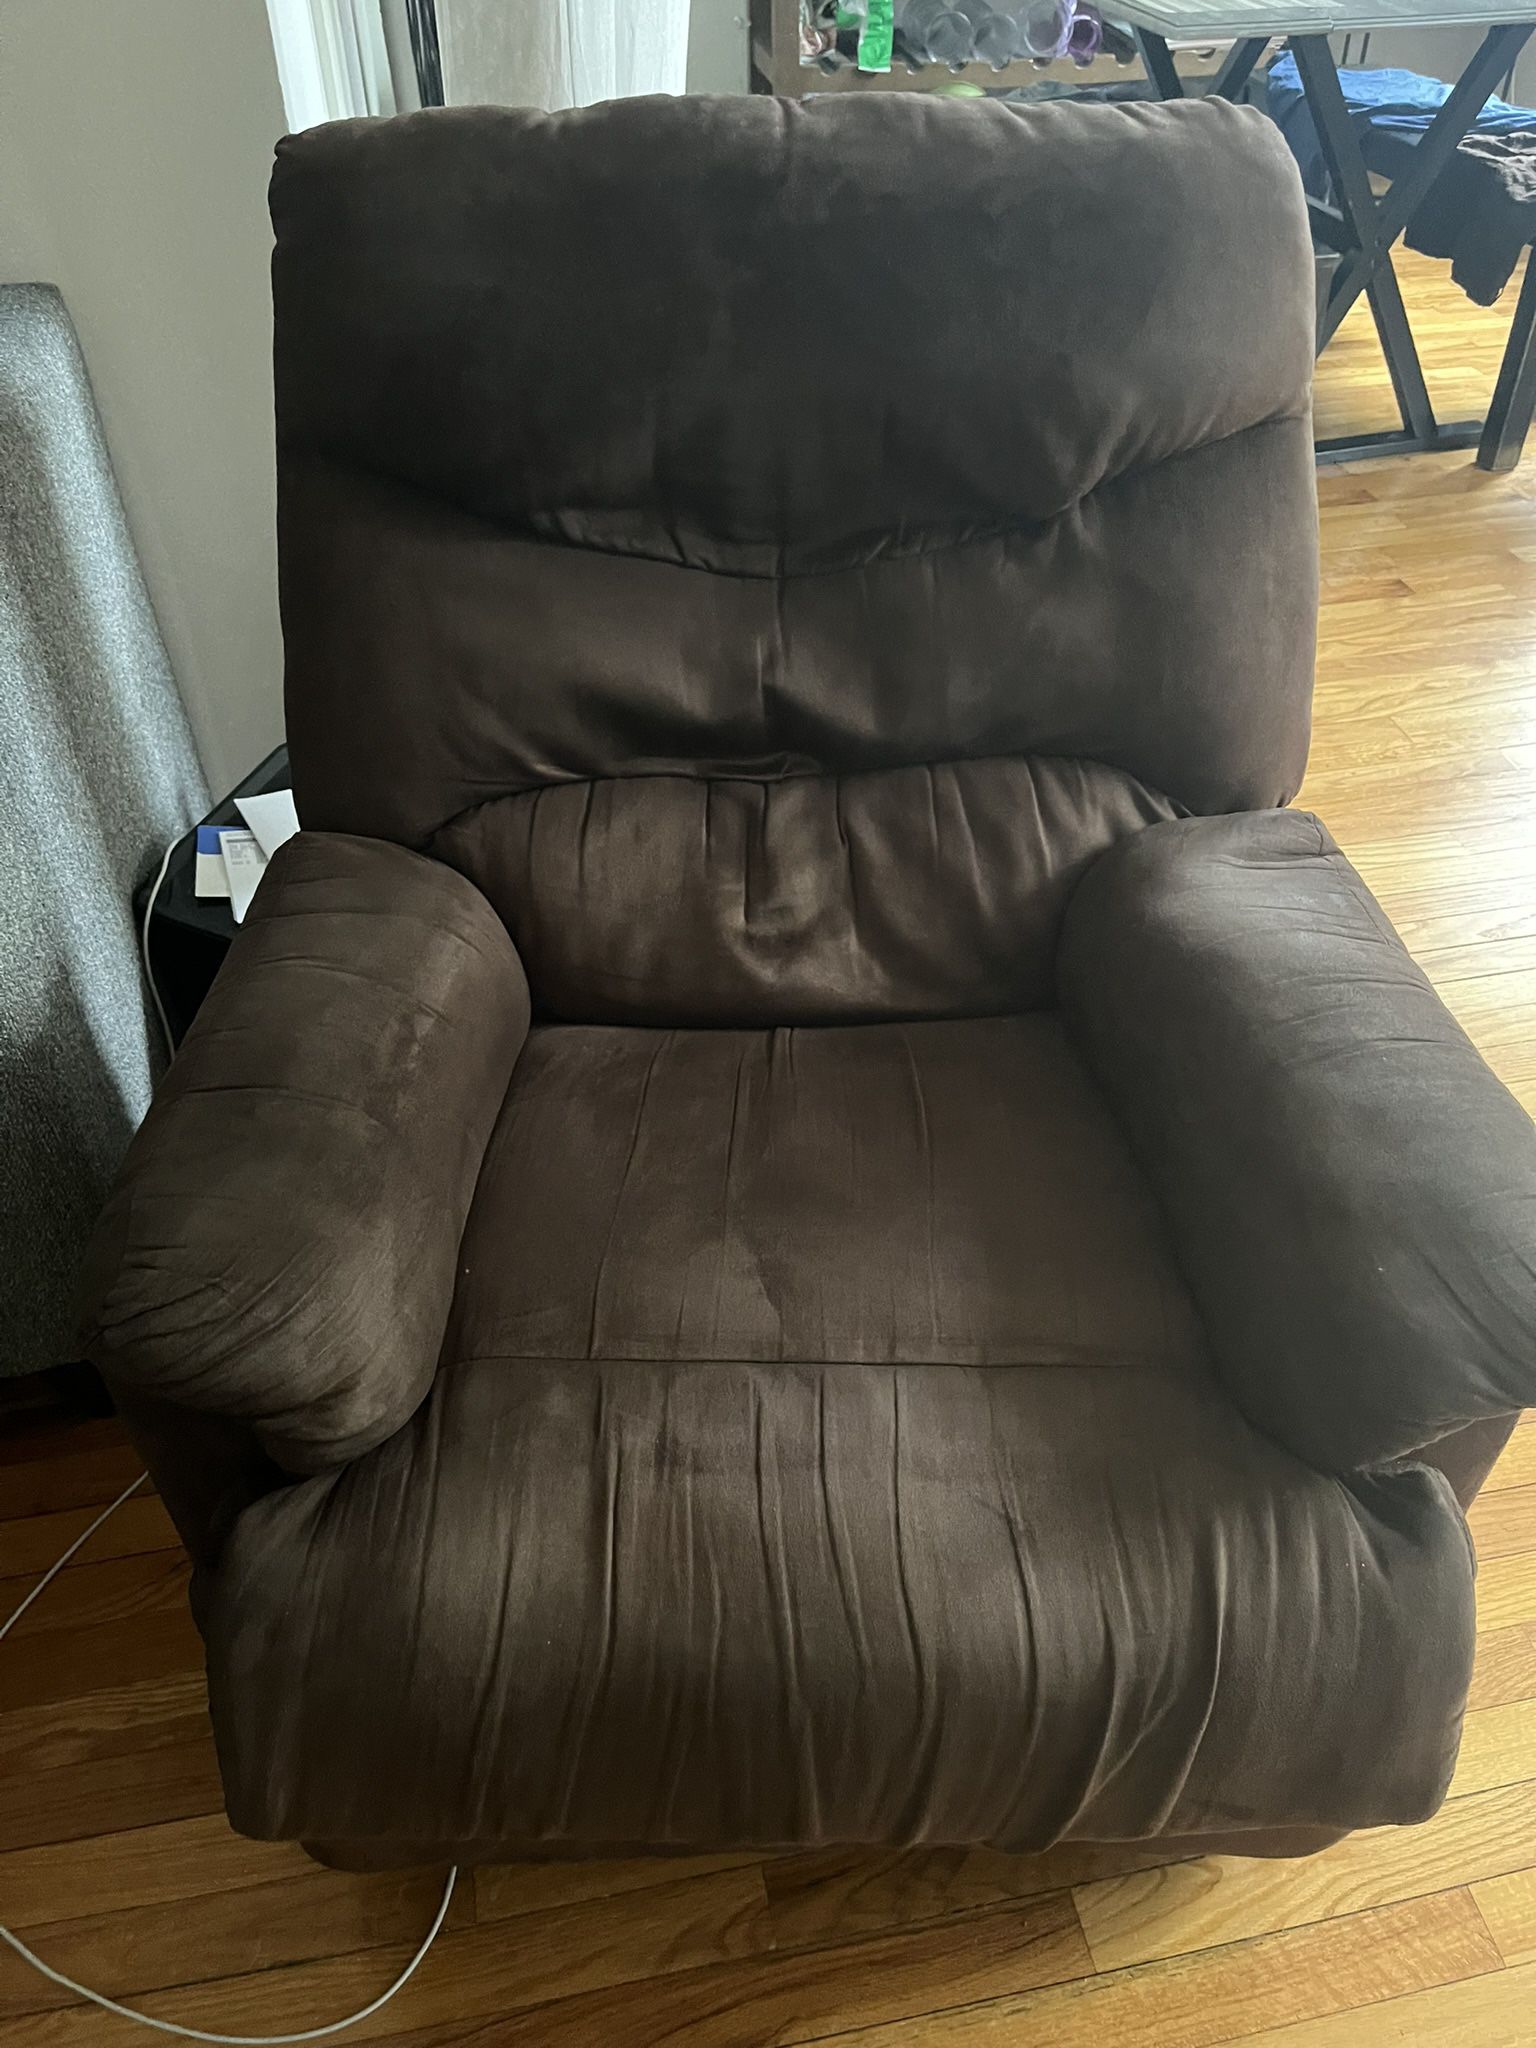 2 Recliners 